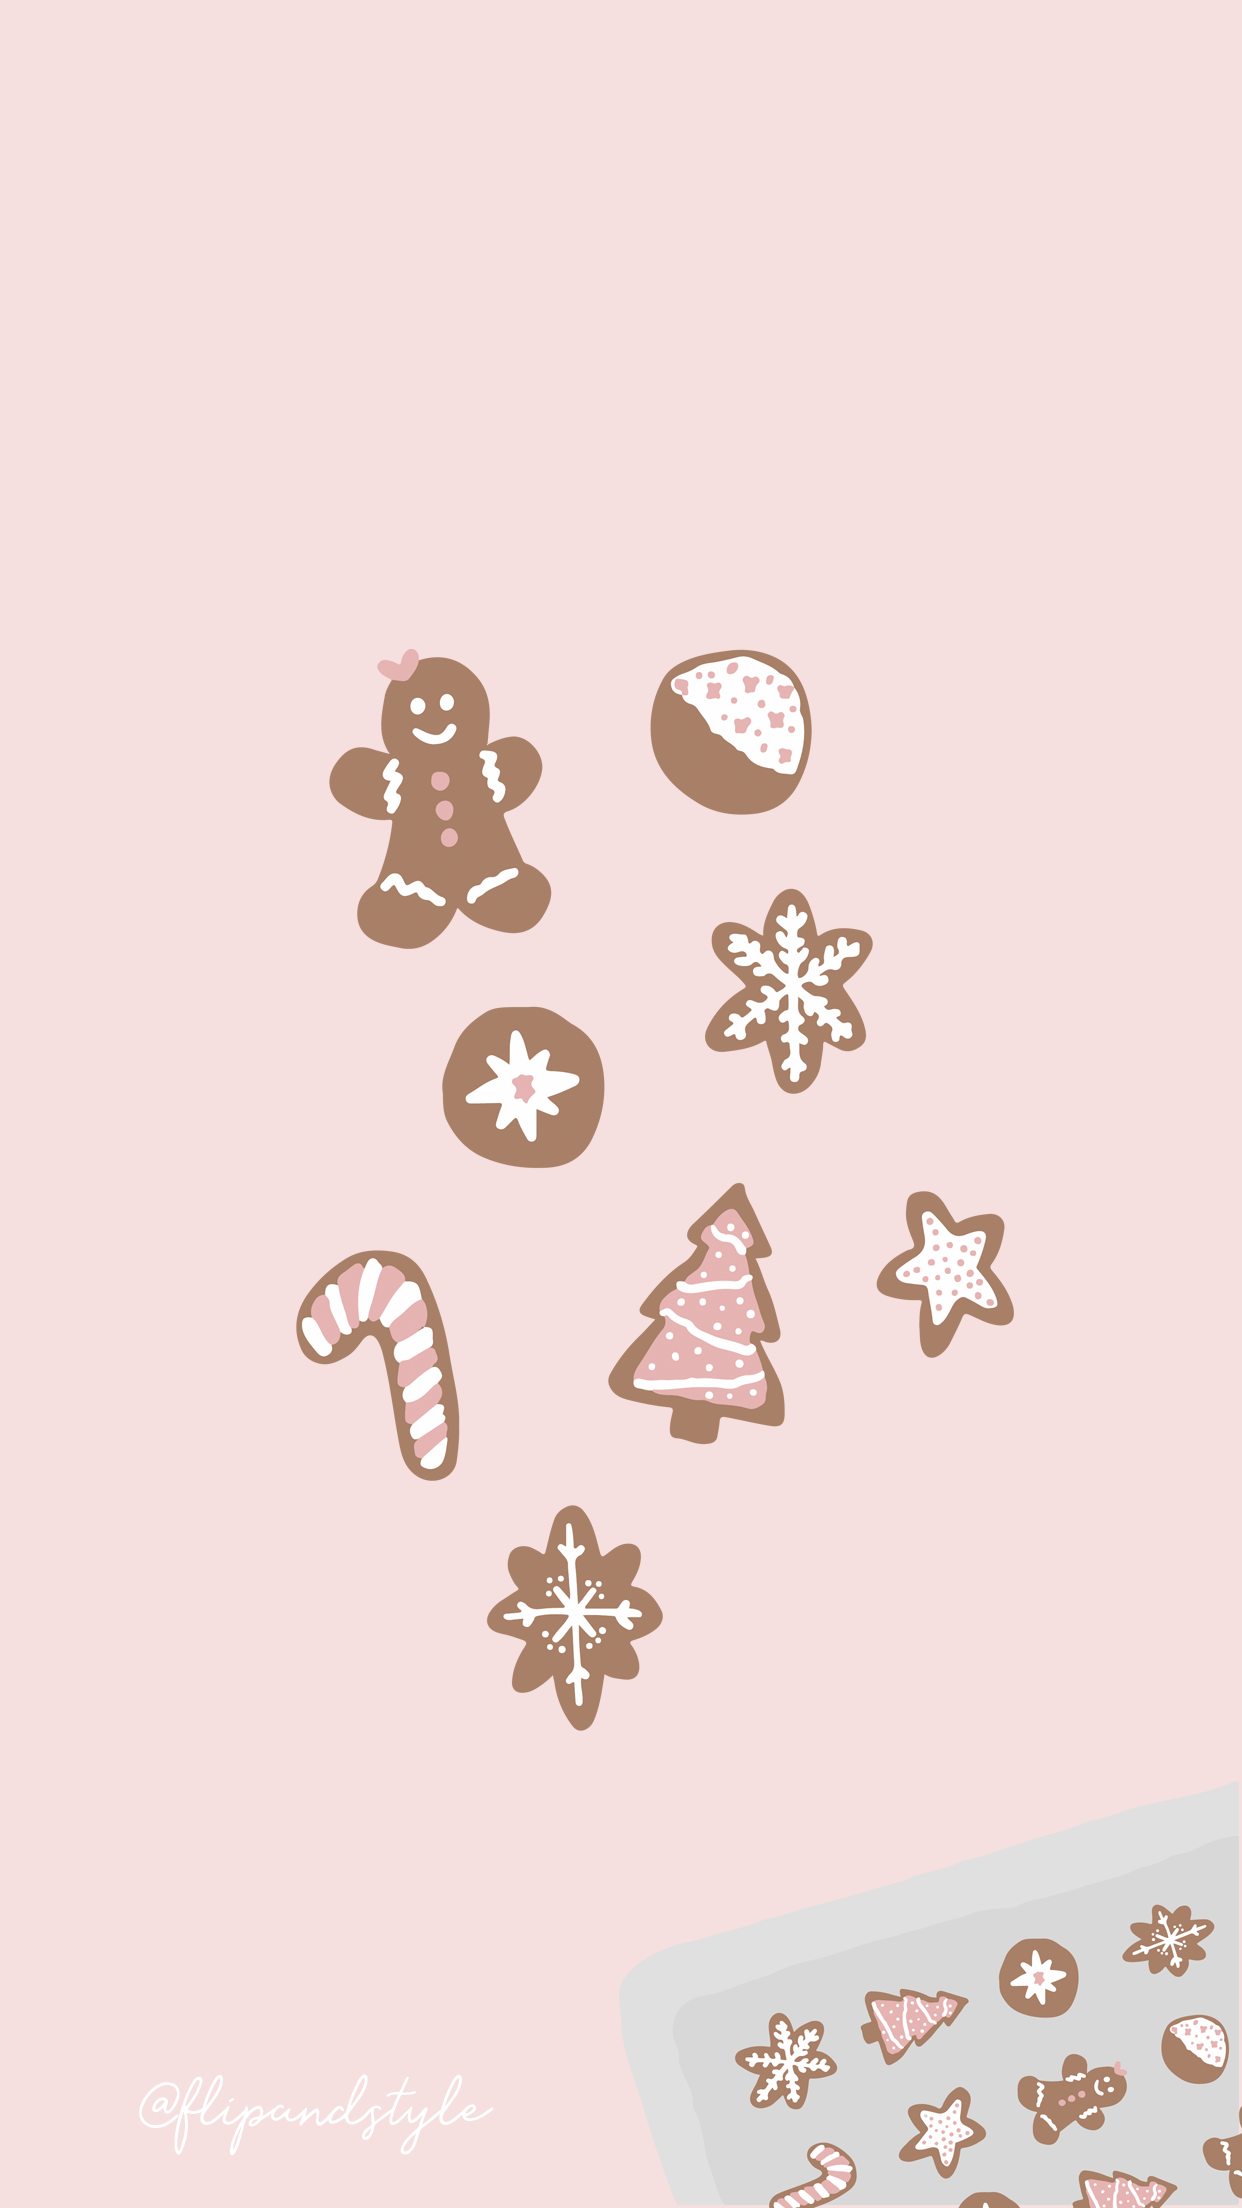 A pink background with gingerbread cookies on it - Christmas, cute Christmas